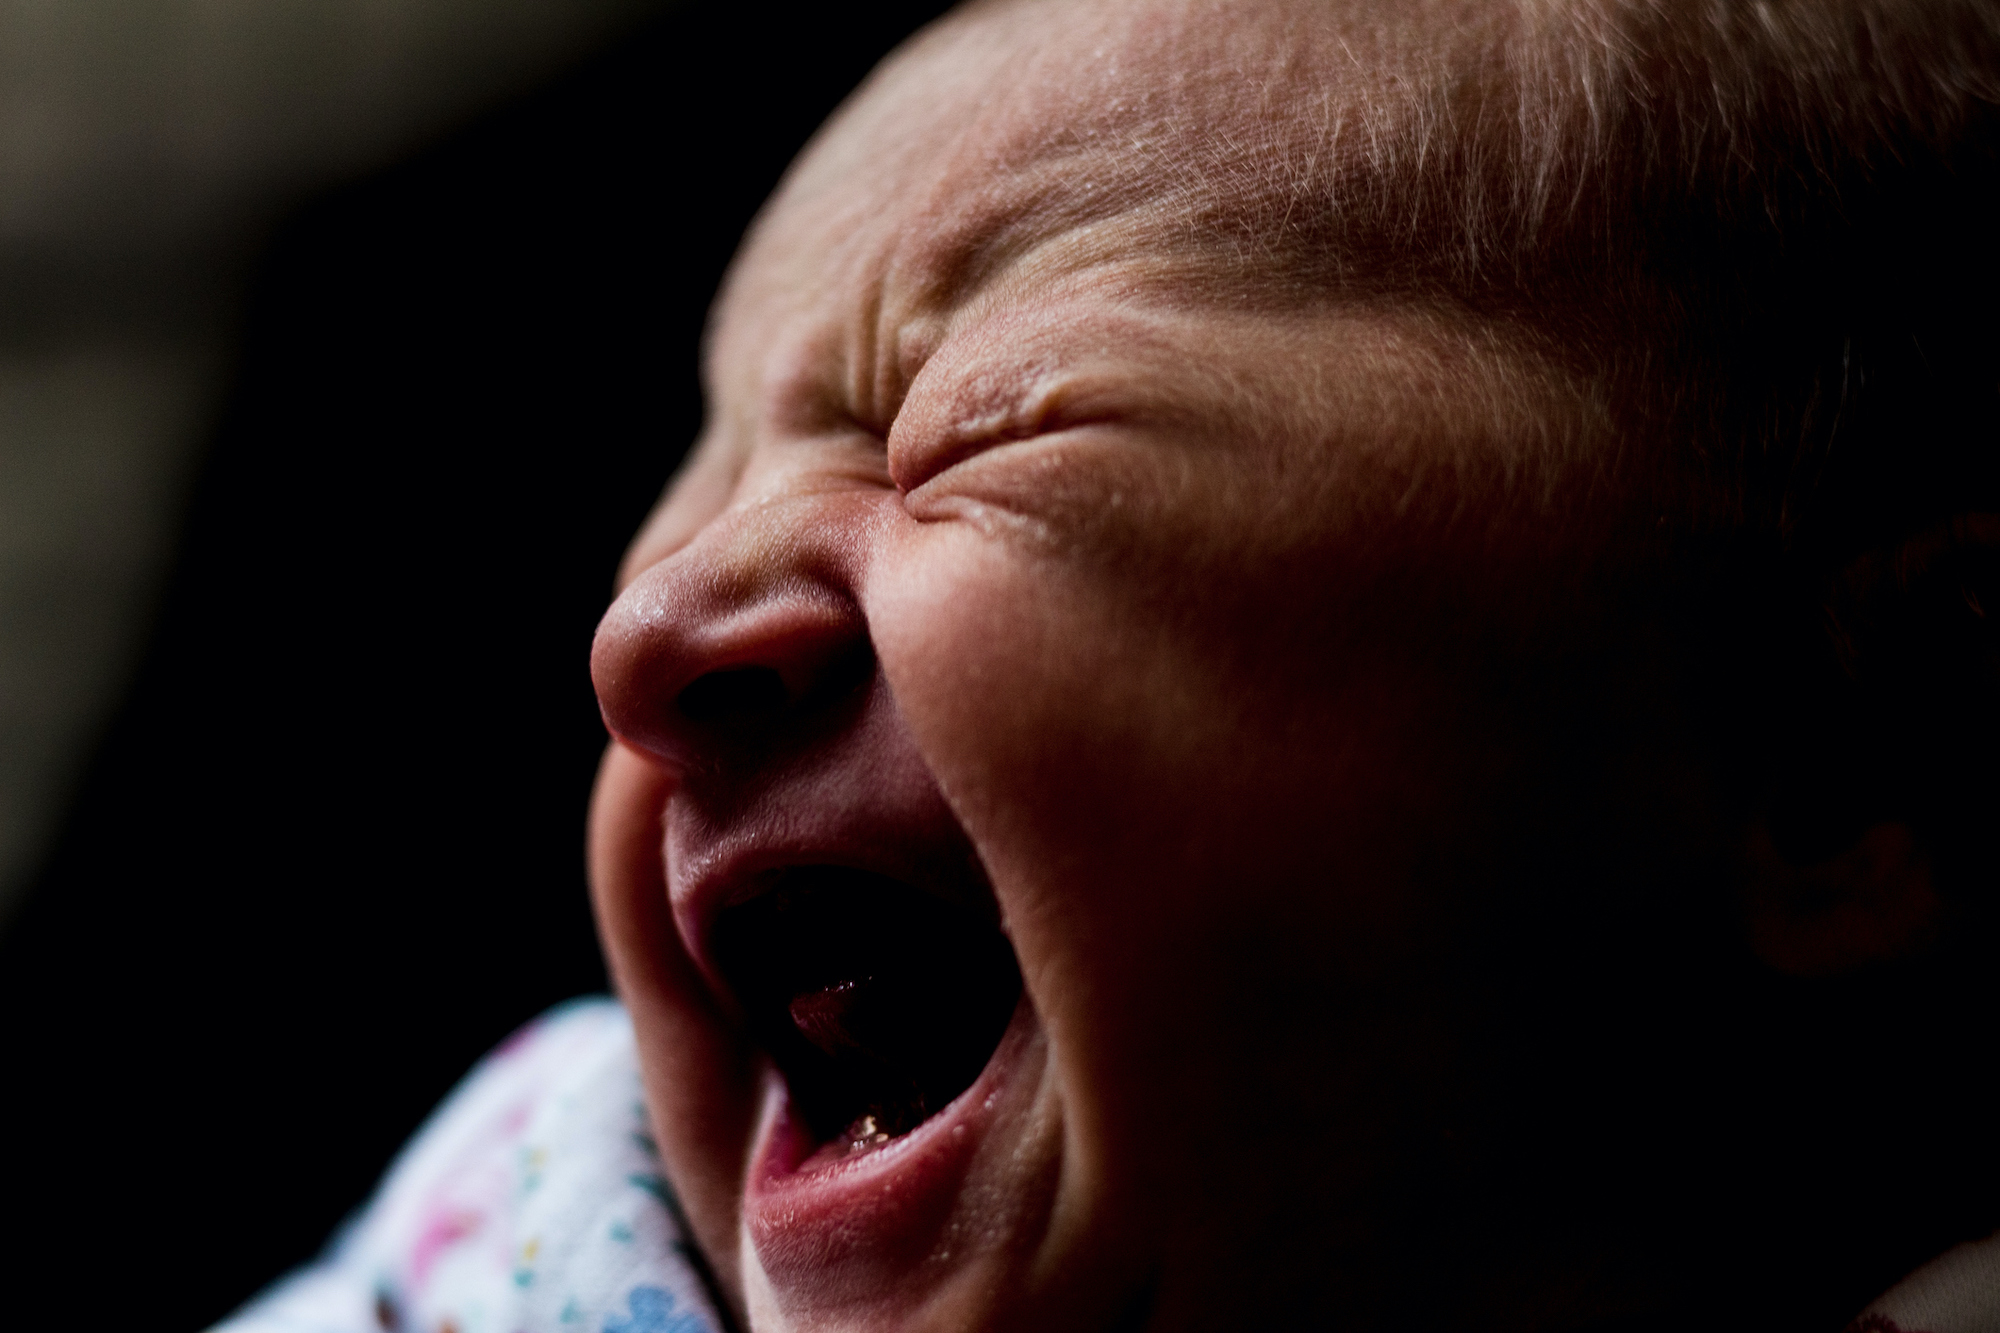 A close-up of a baby crying, mid-cry.